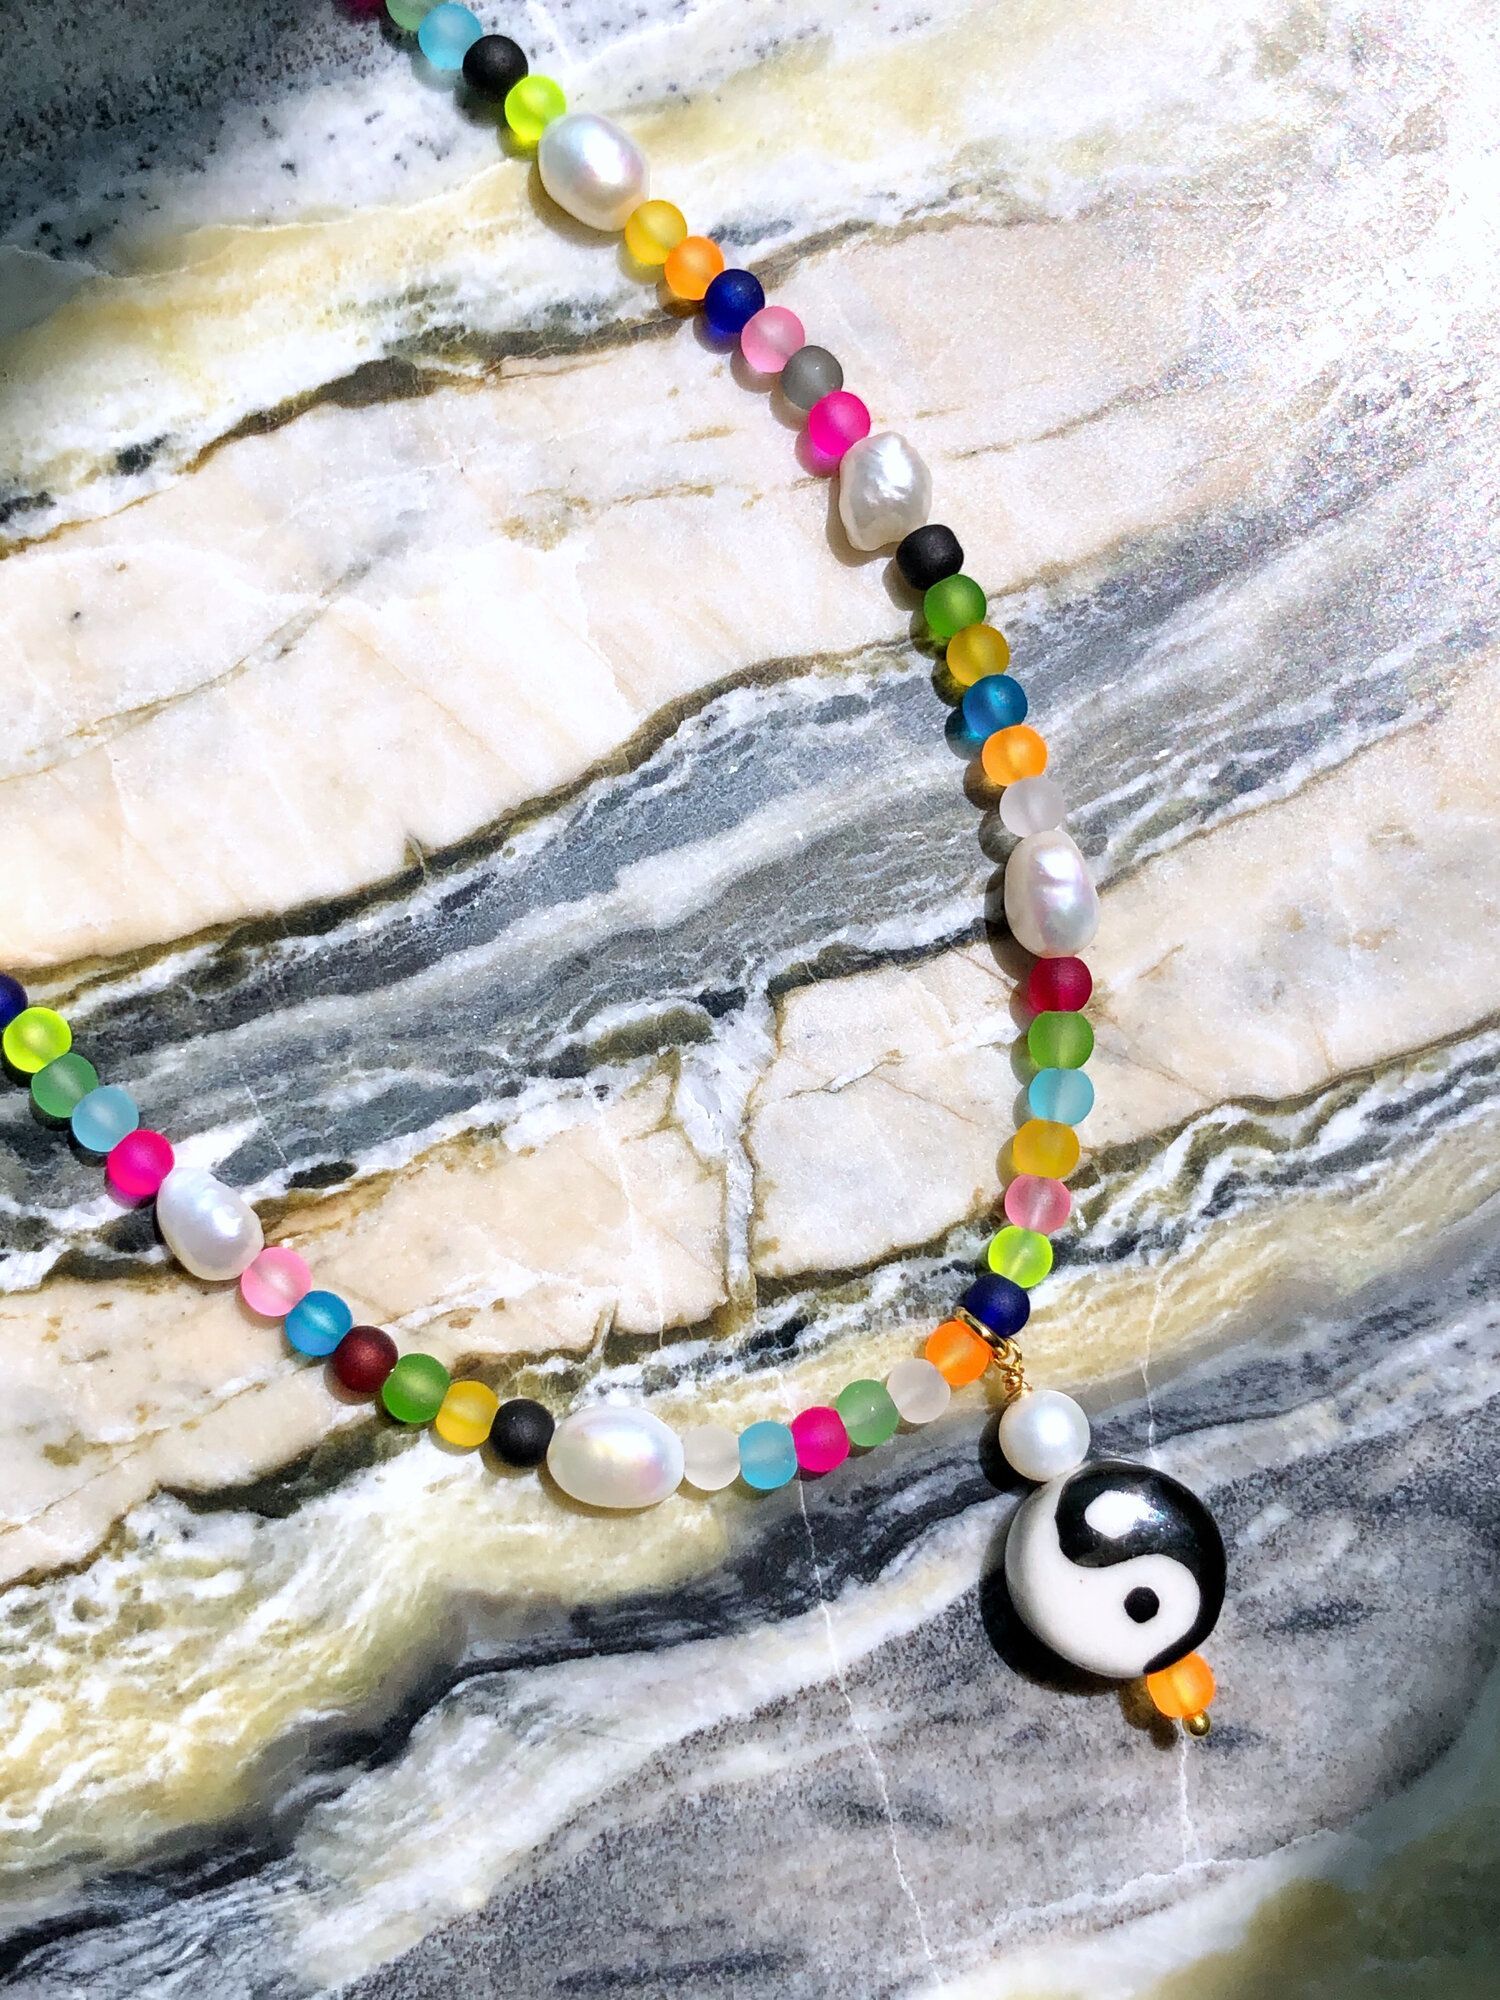 THE YIN TO MY YANG RAINBOW NECKLACE